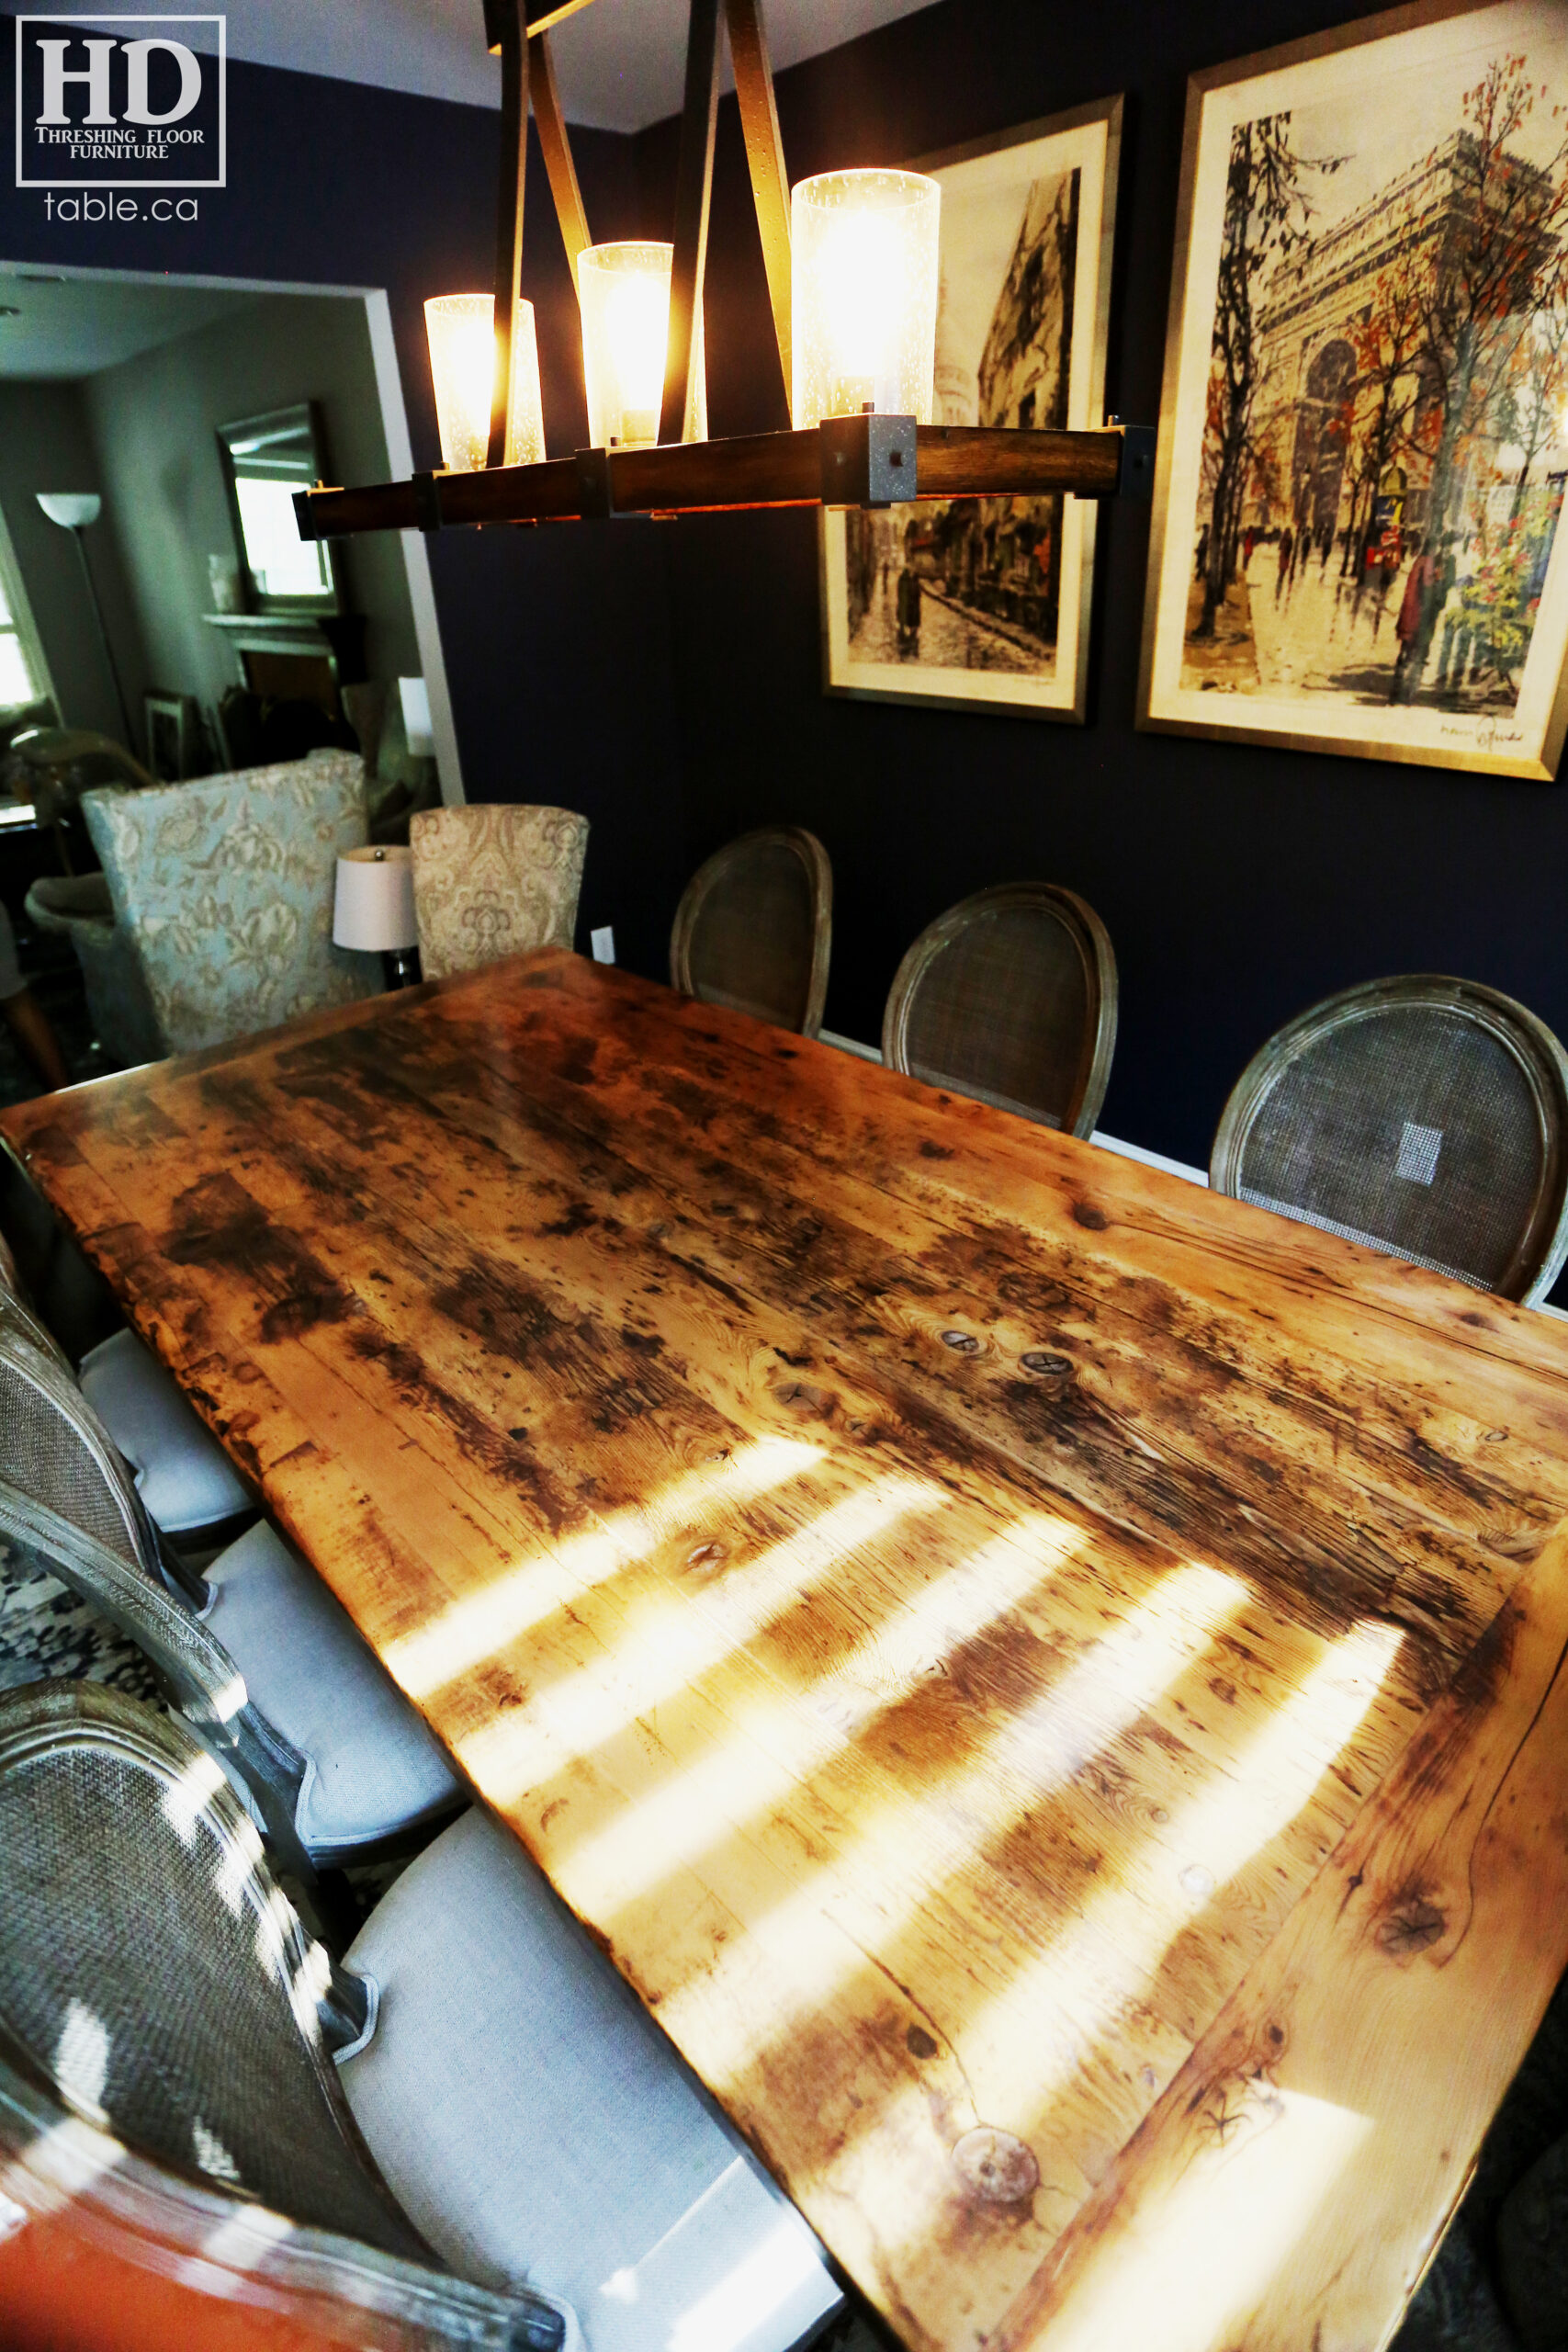 Reclaimed Wood Table with Greytone Treatment [Maintains Colour of Unfinished] by HD Threshing Floor Furniture / www.table.ca